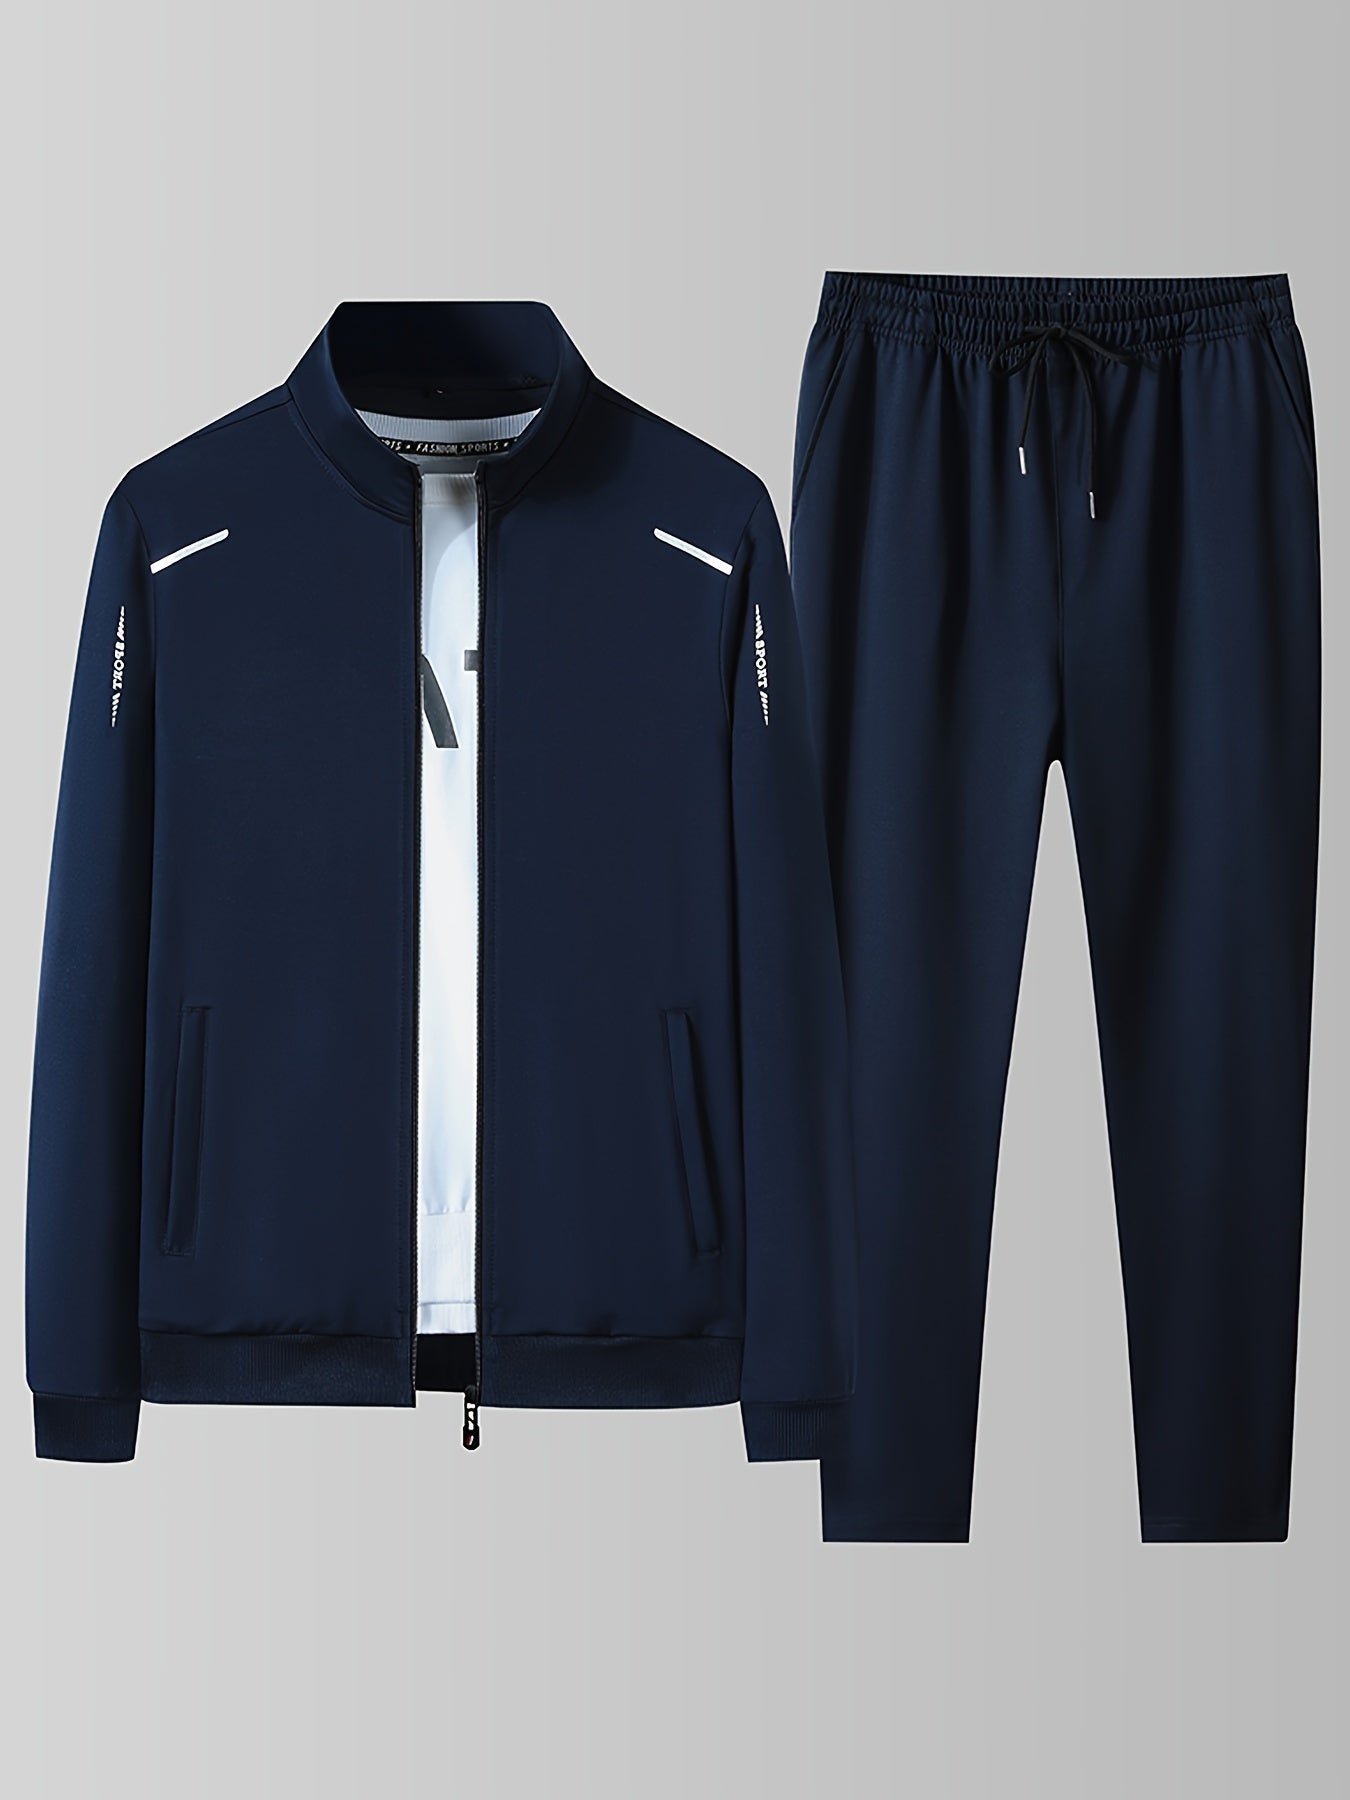 Ultimate Comfort Performance Fleece Men's Athletic Tracksuit - Perfect for Sports and Casual Wear - CasualFlowshop